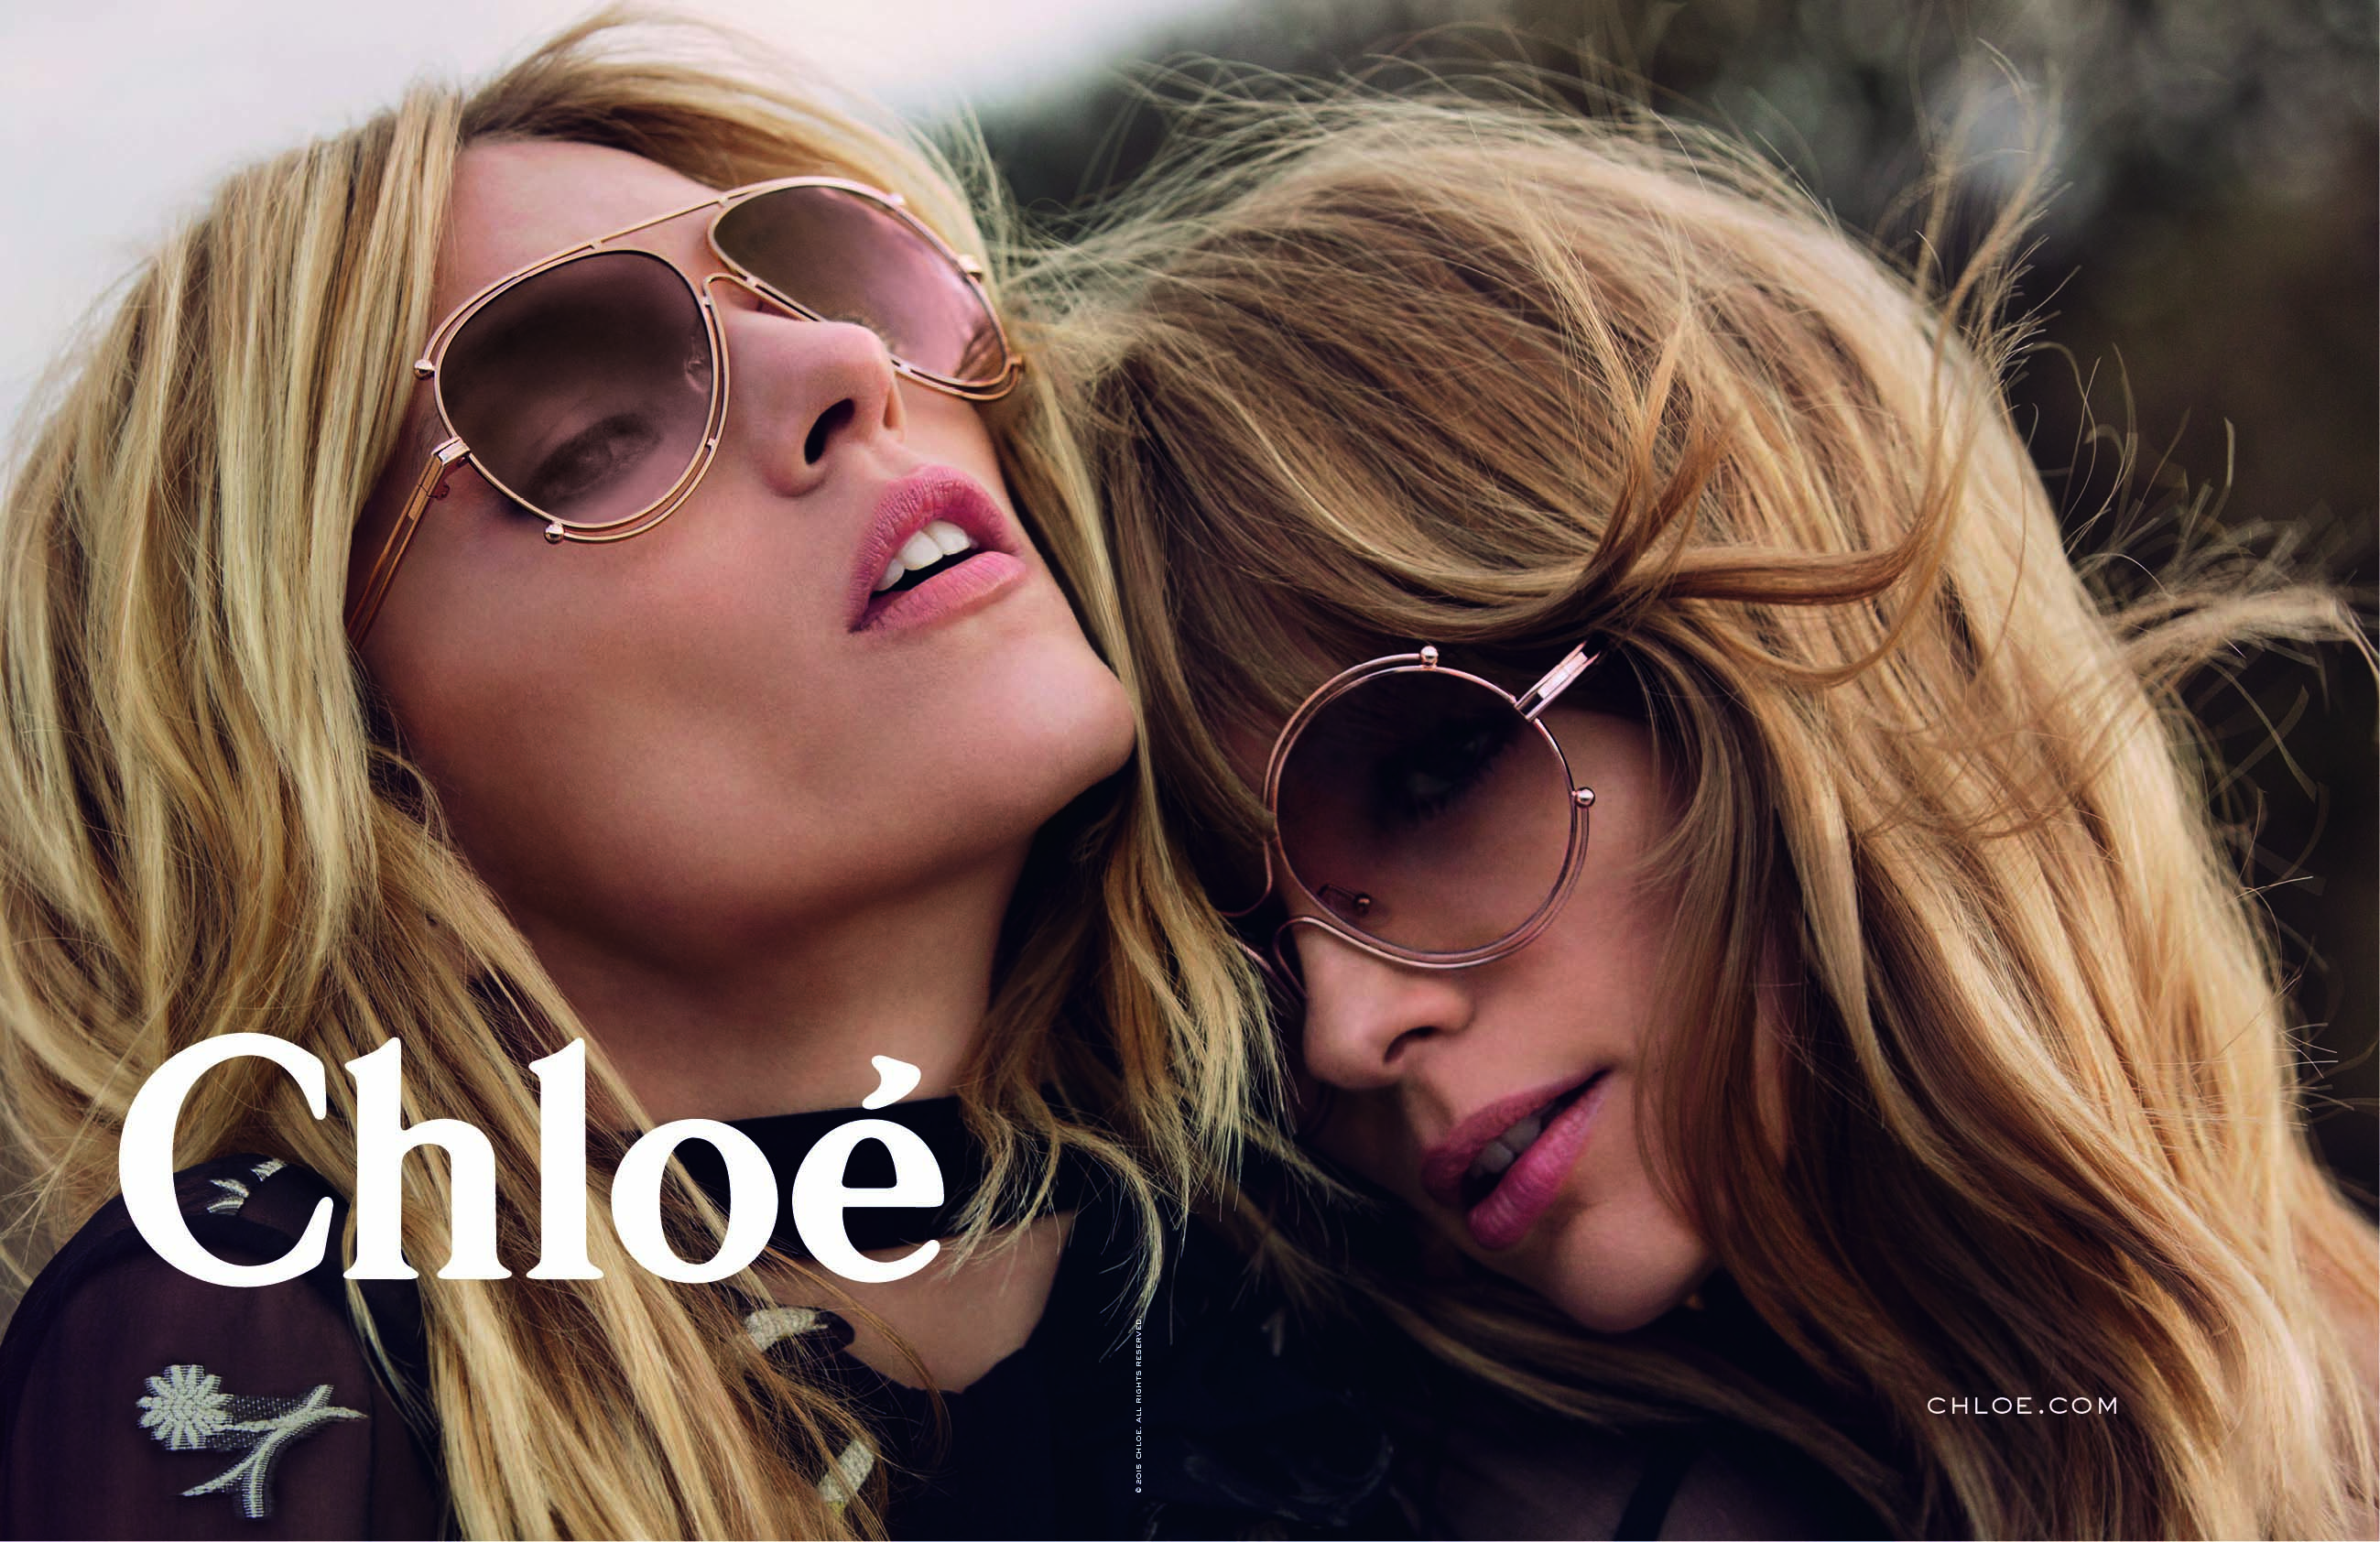 Friendship at the Heart of Chloé Fall Campaign